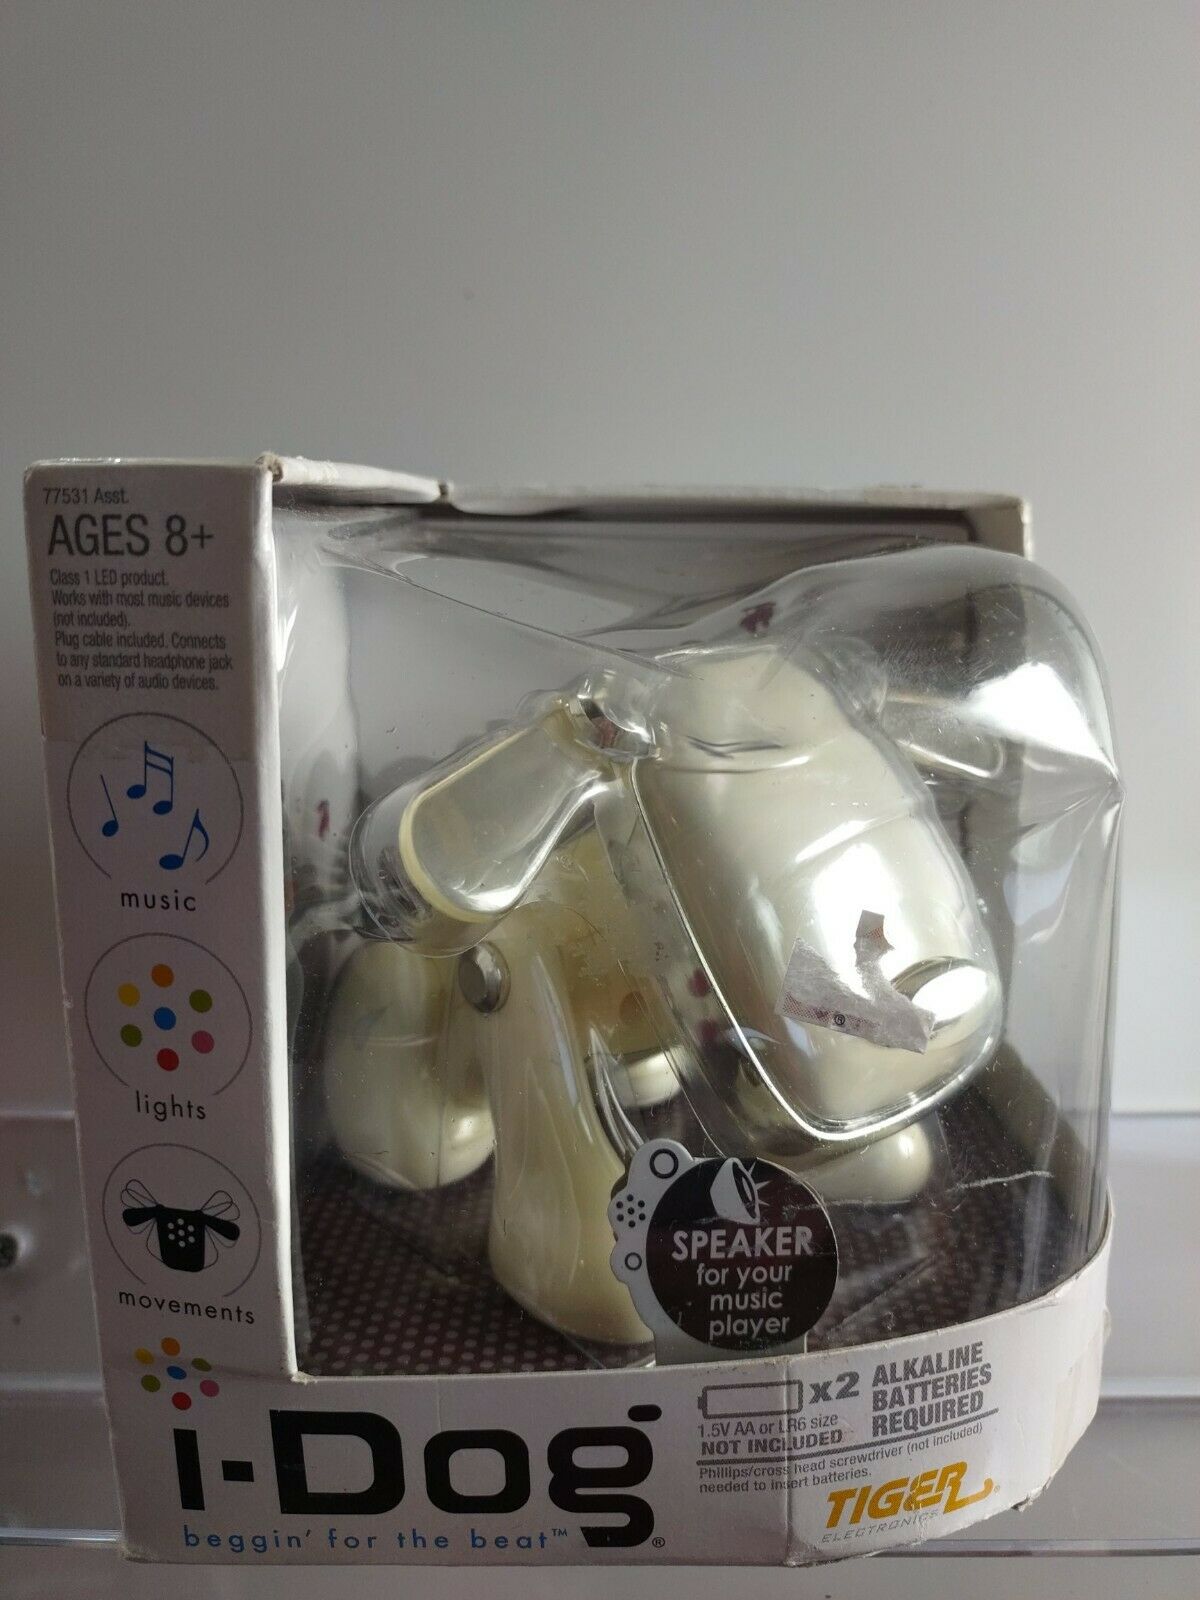 New Tiger Electronic White  Idog I-dog Toy Beggin For The Beat Lights Music